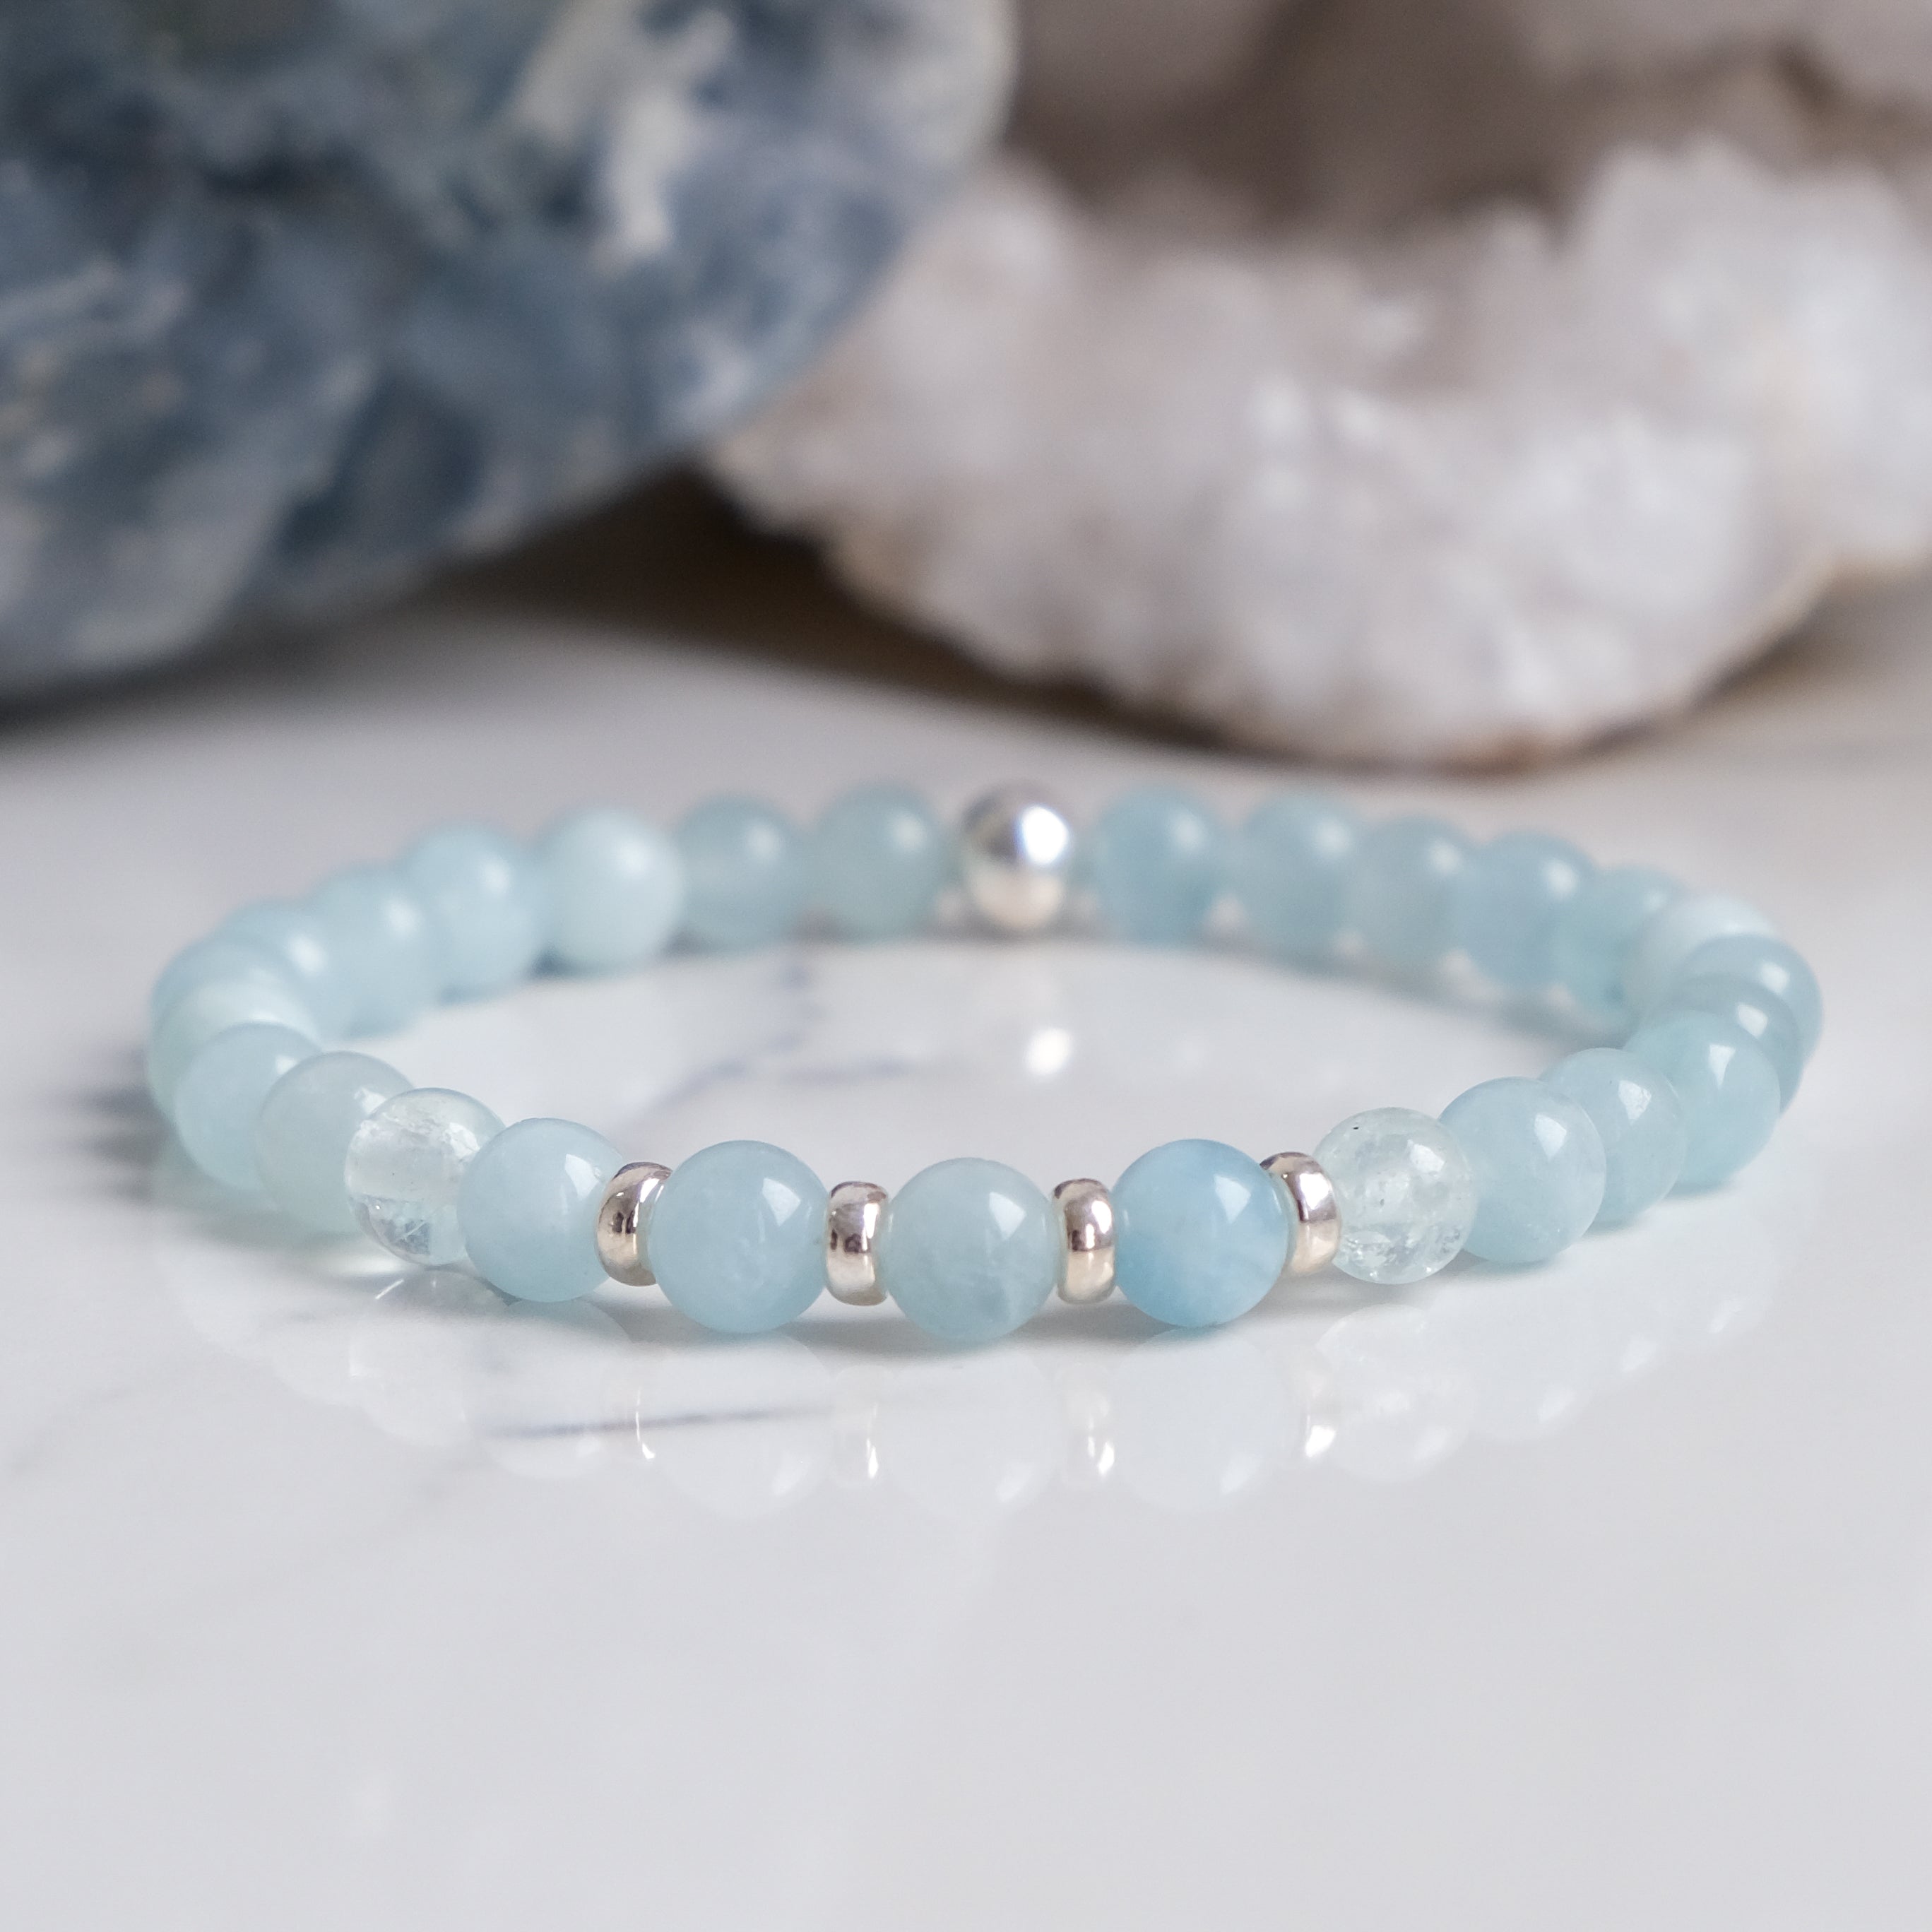 An Aquamarine gemstone bracelet in 6mm beads with 925 sterling silver accessories